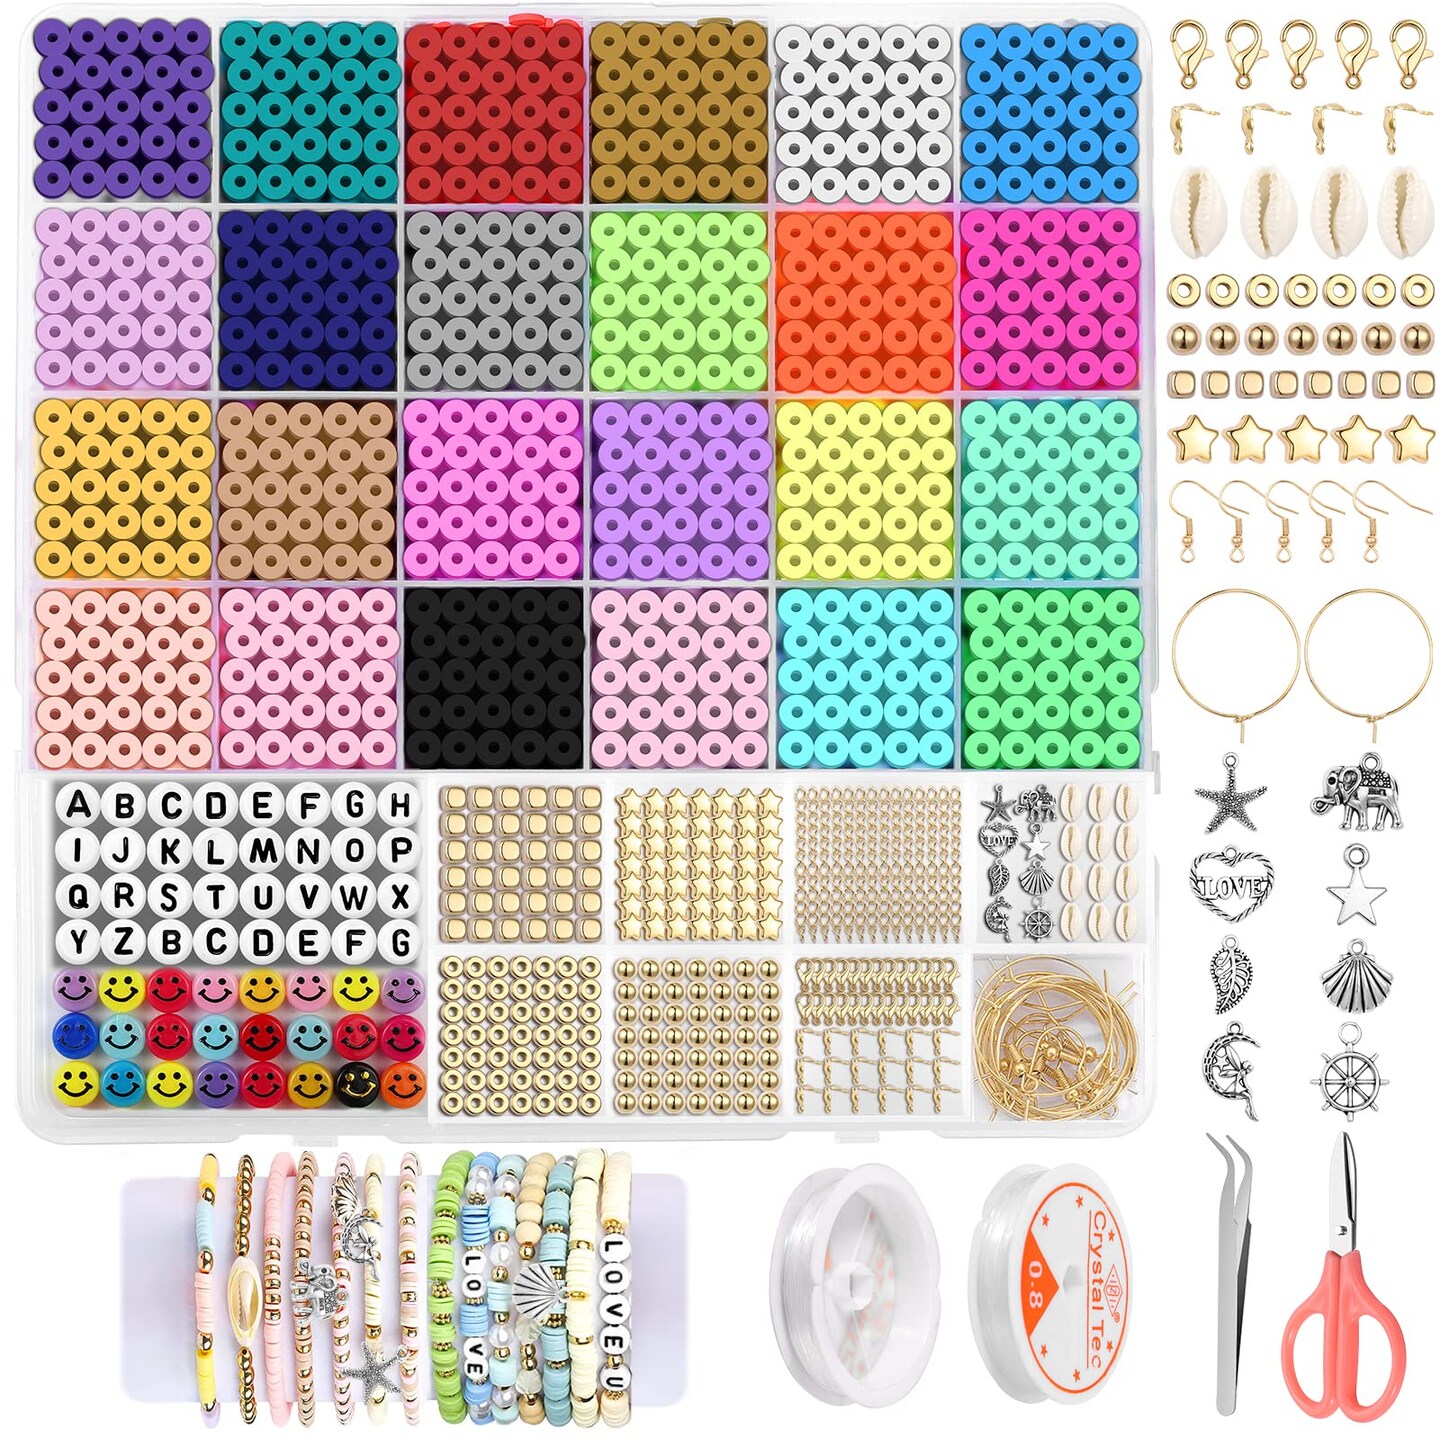 4000pcs Bracelet Beads for Jewelry Making Kit Bead Craft Kit Set 3mm  Glass Seed Letter Love Heart Beads DIY Art and Craft with Elastic String  Cord  Shopee Singapore